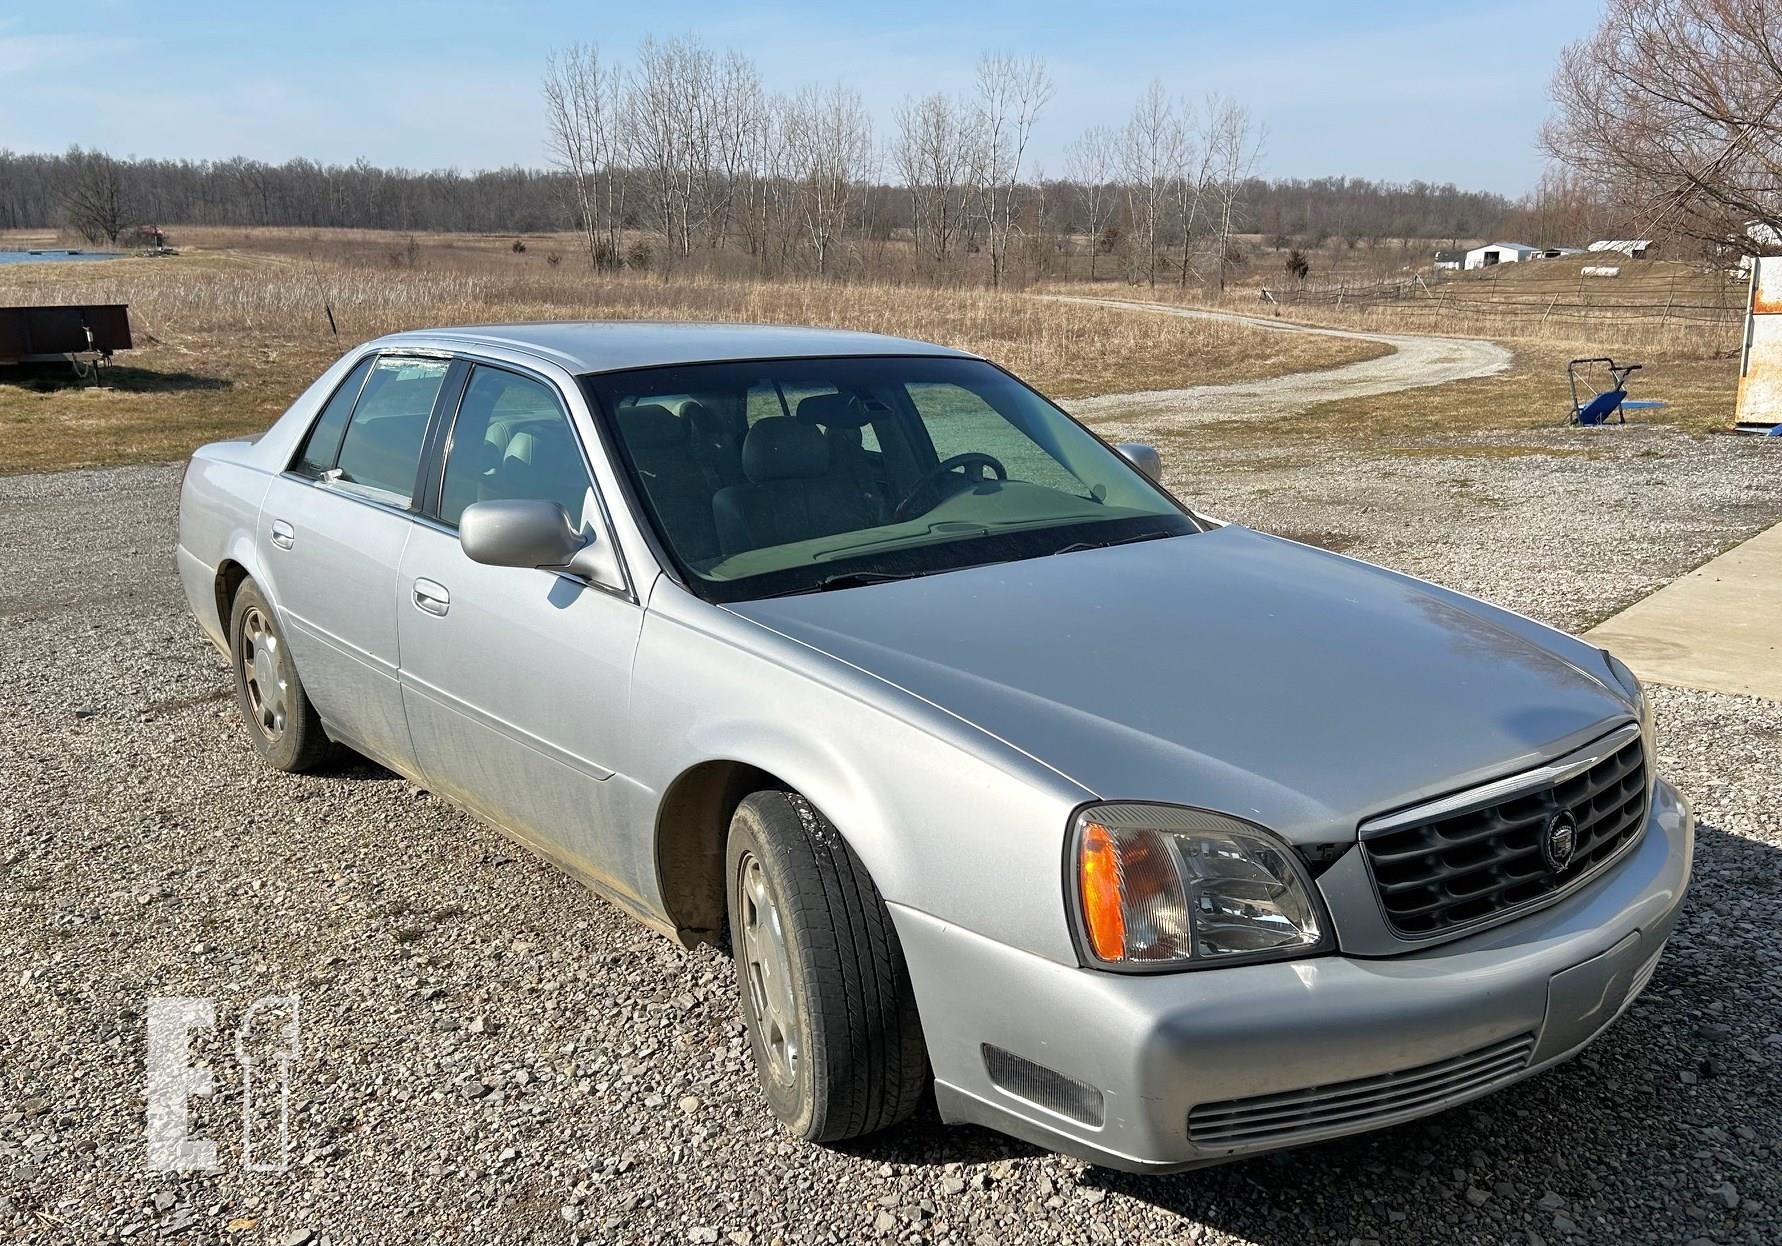 CADILLAC Other Items Online Auctions - 11 Listings